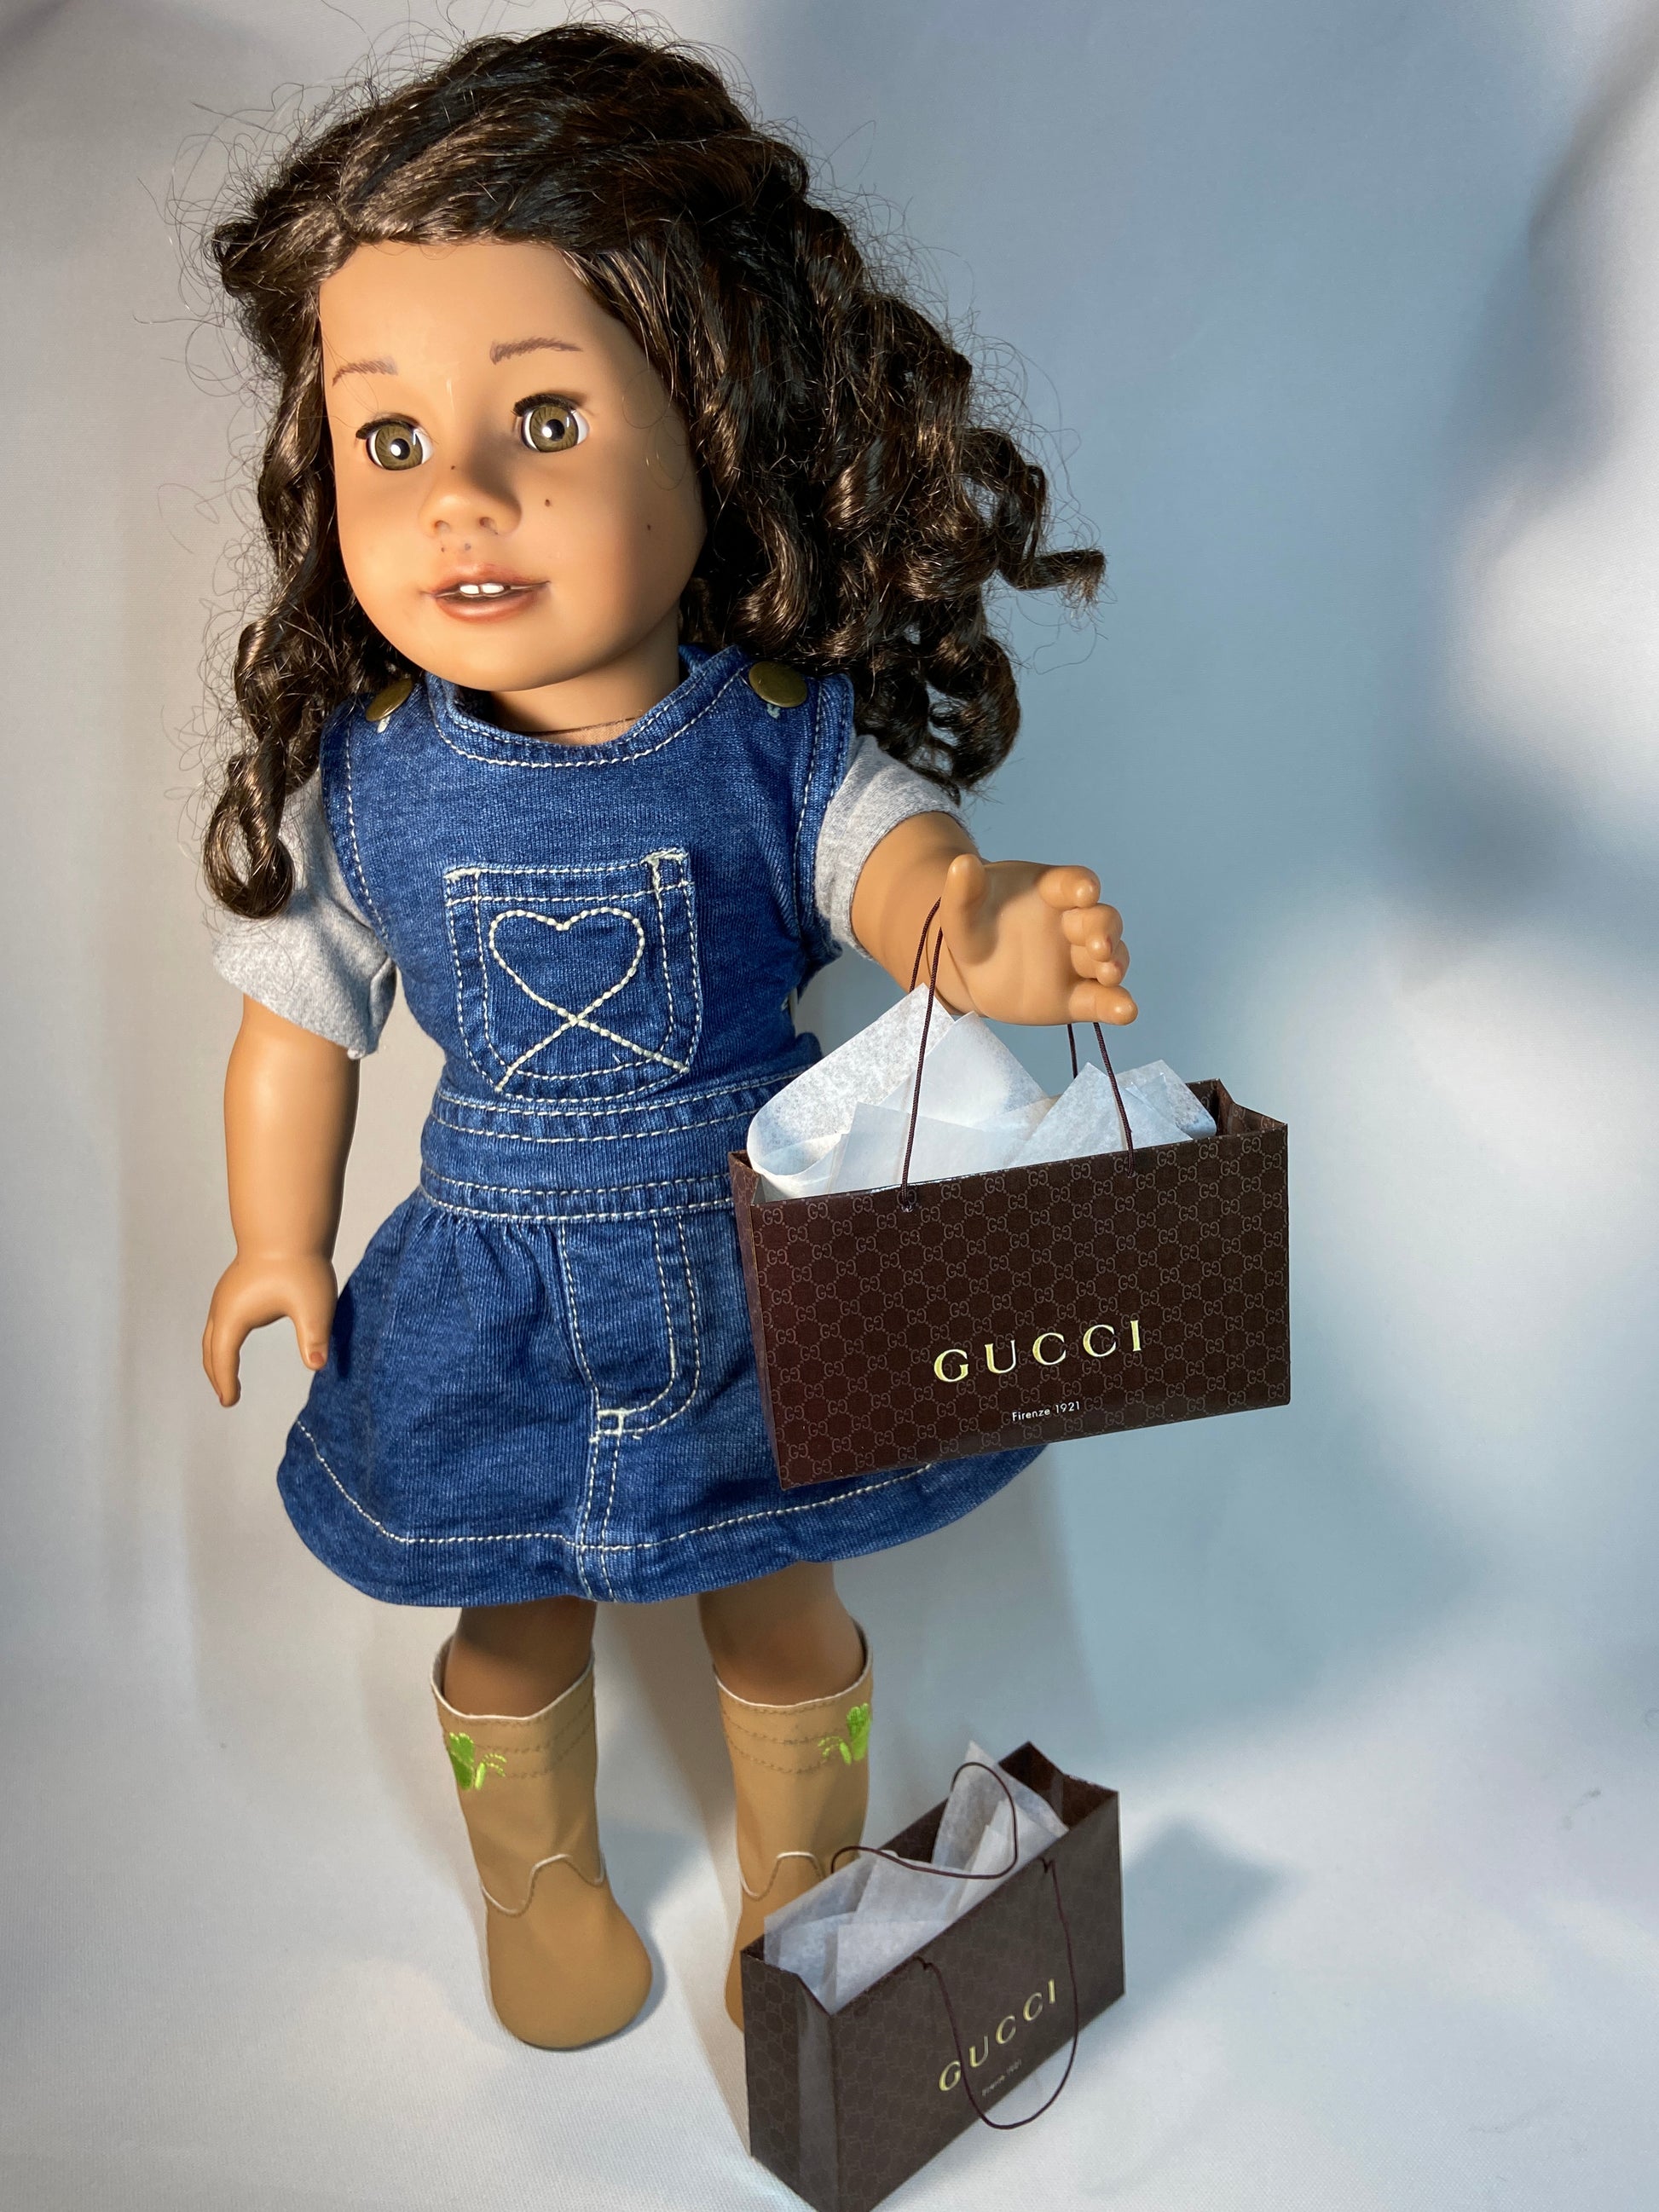 MINIATURE SHOPPING BAGS FOR AMERICAN GIRL & MY LIFE DOLLS – Art